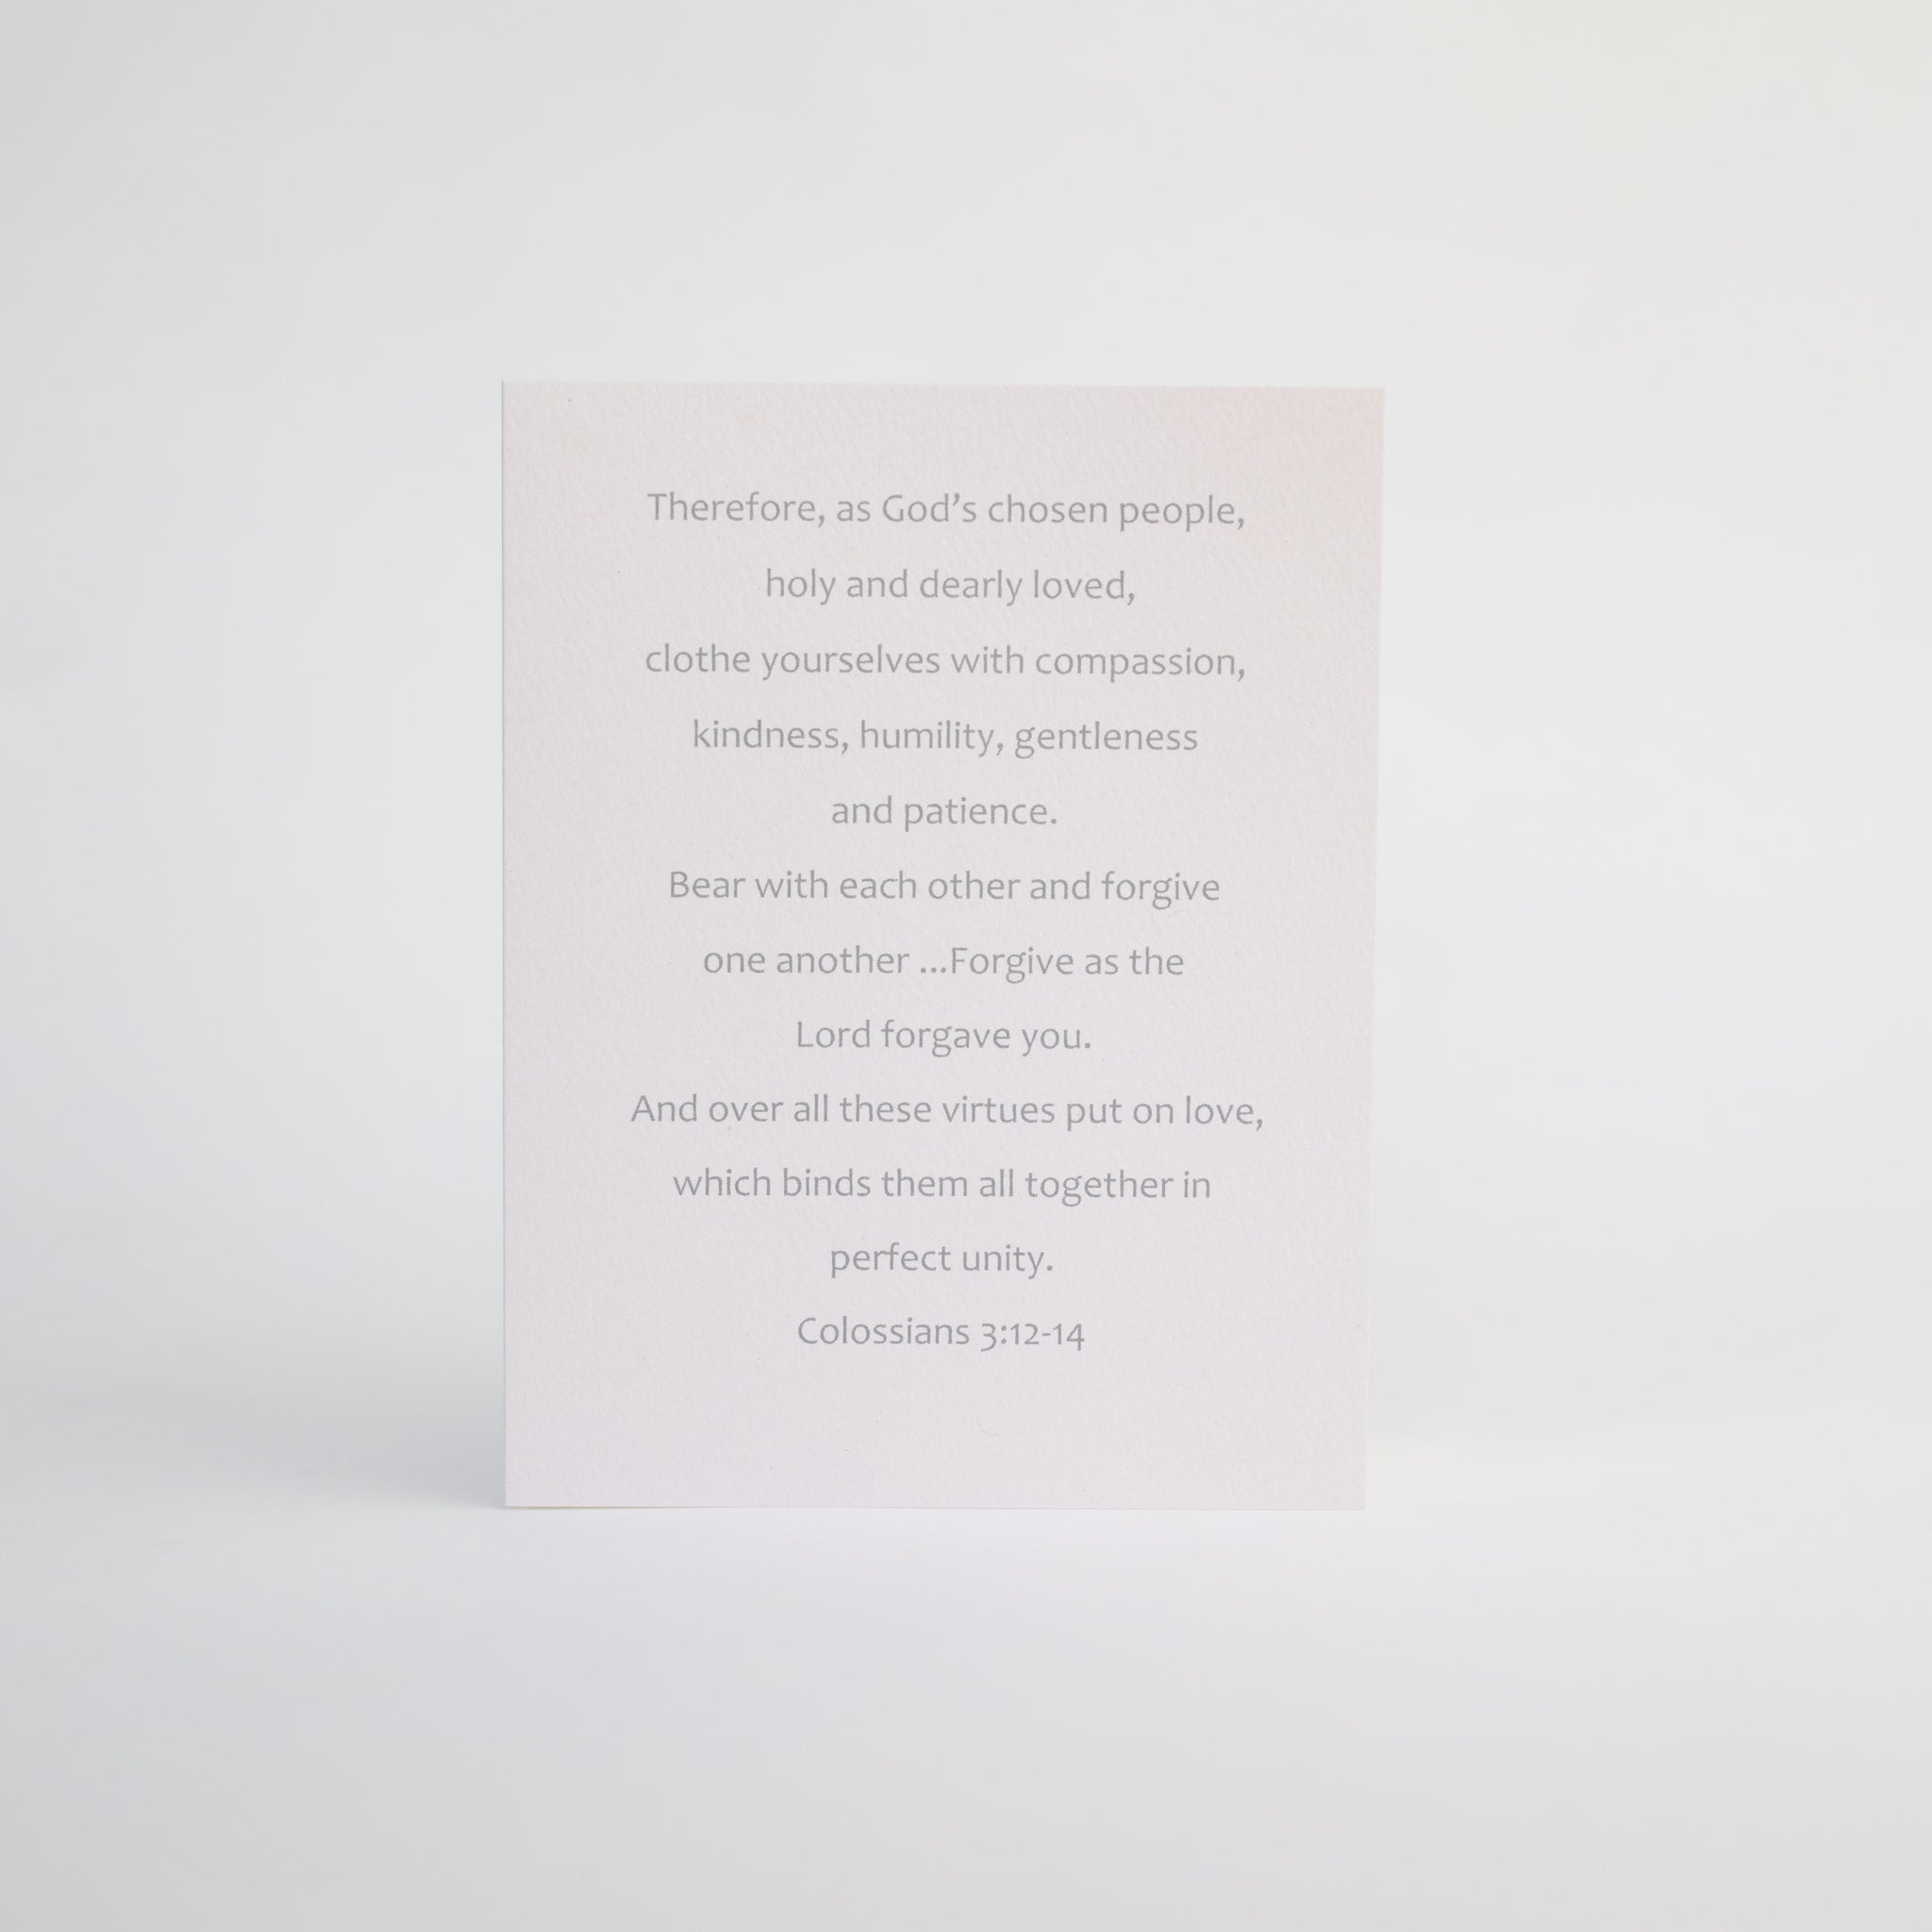 4.25 x 5.5 inch Christian Bible verse greeting card featuring Colossians 3:12-14 from the New International Version of the Holy Bible printed on Neenah Royal Sundance Cover (felt finish). Blank in the middle, additional devotional thought on the back, white envelope.